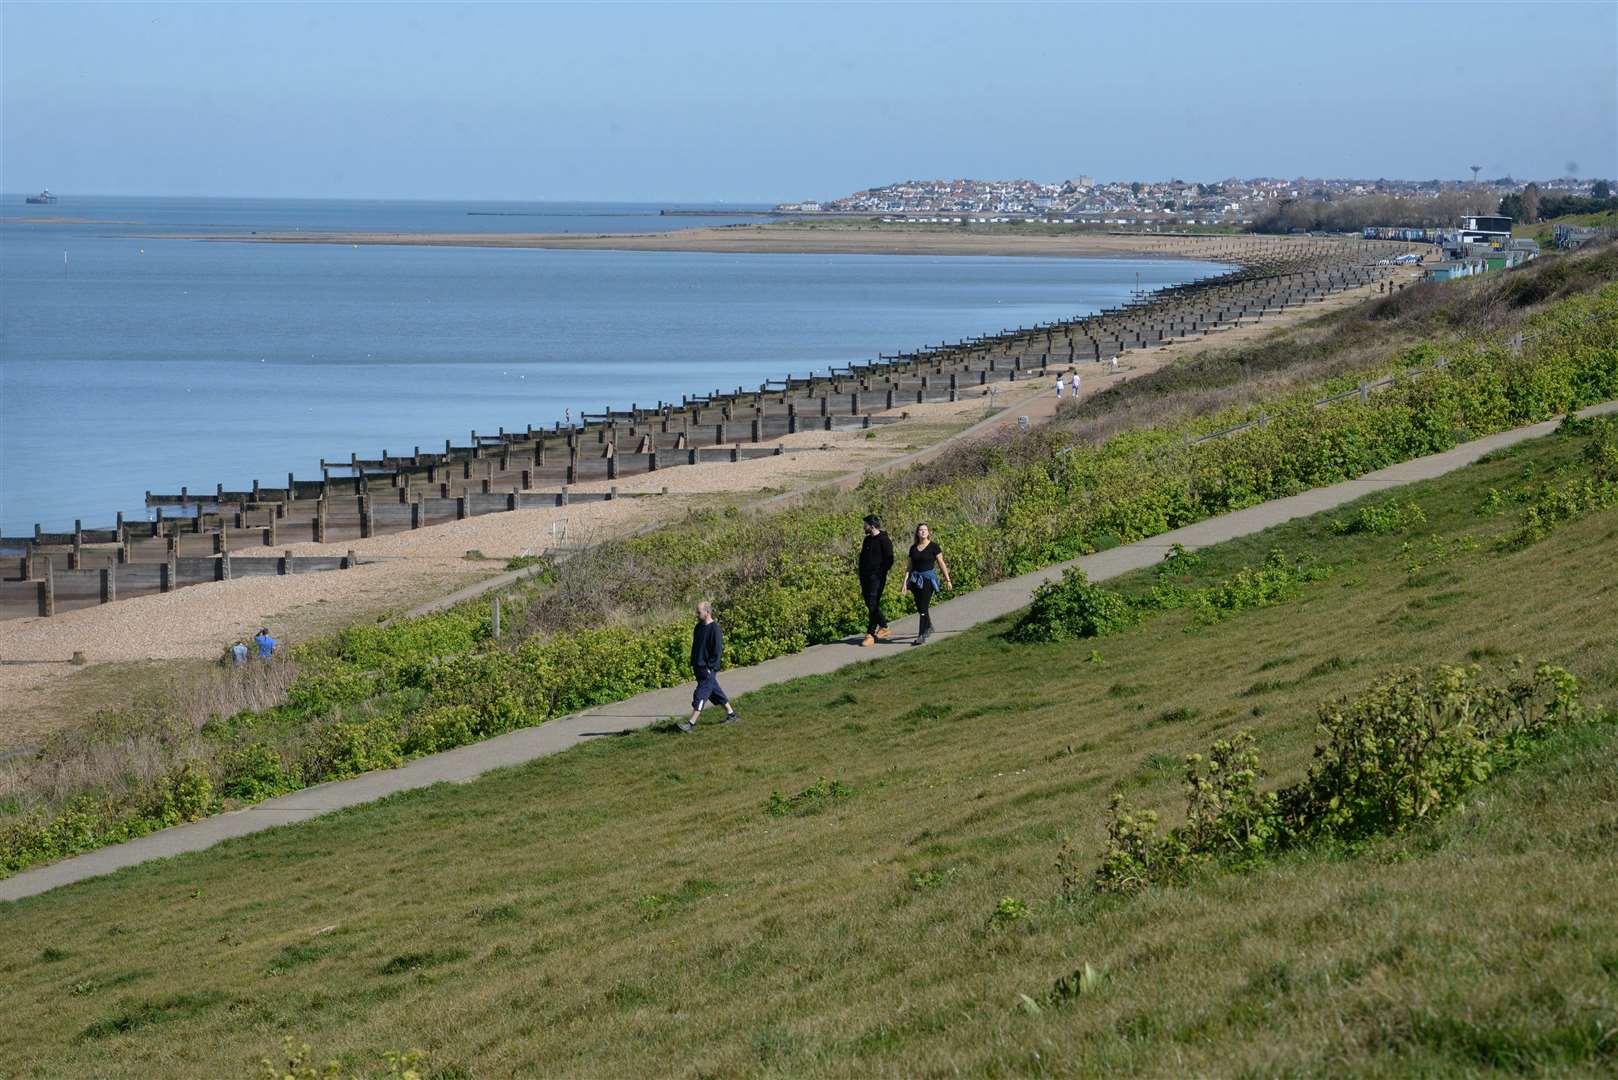 There were few people on Tankerton Slopes in Whitstable on Saturday afternoon. Picture: Chris Davey